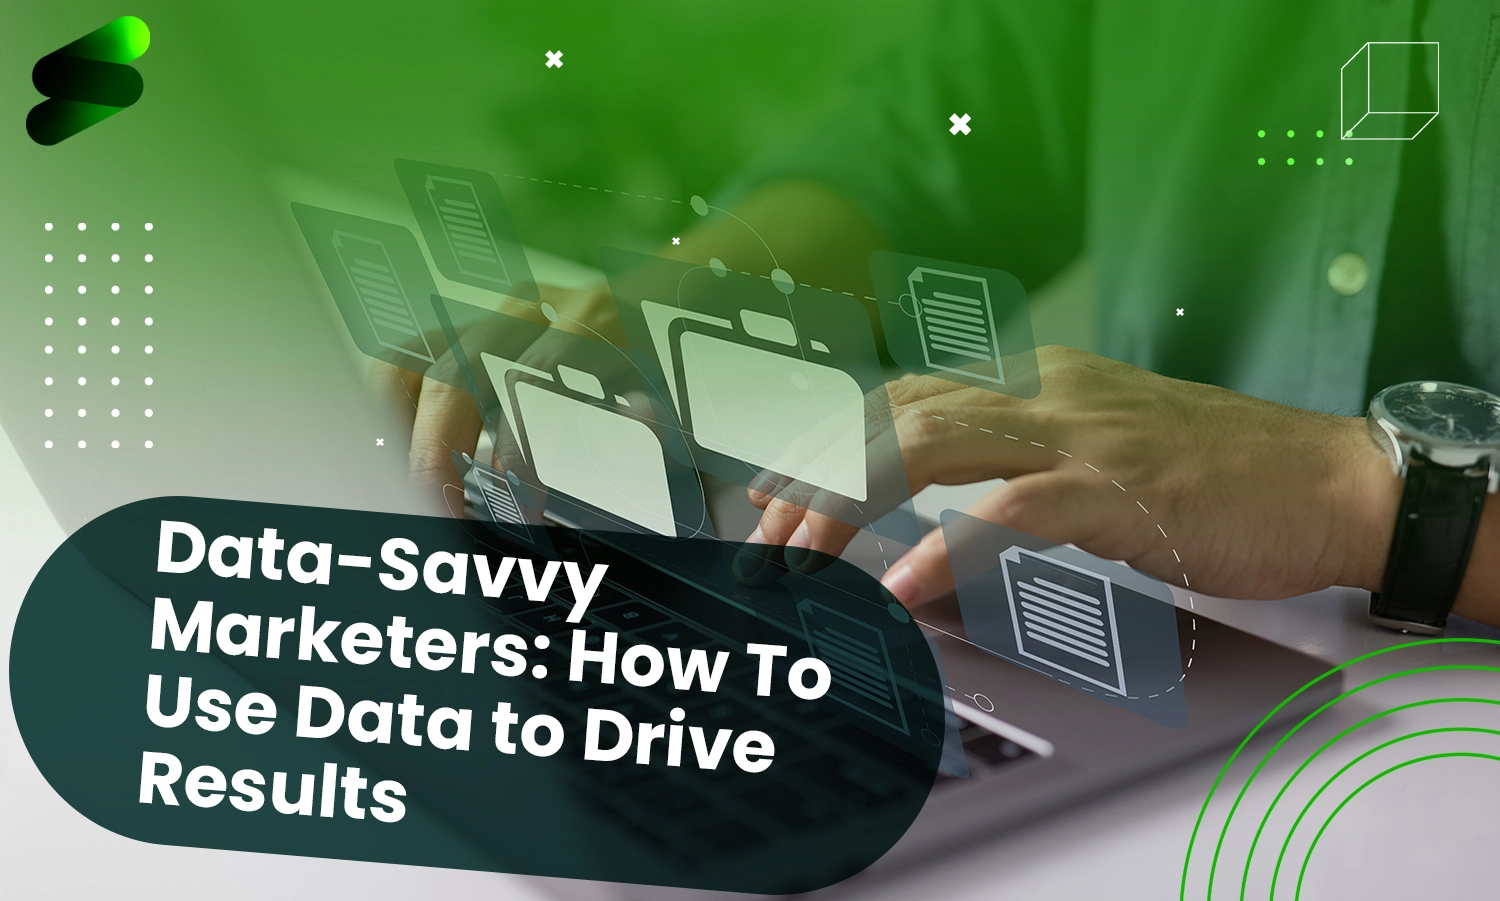 Data-Savvy Marketers: How To Use Data to Drive Results